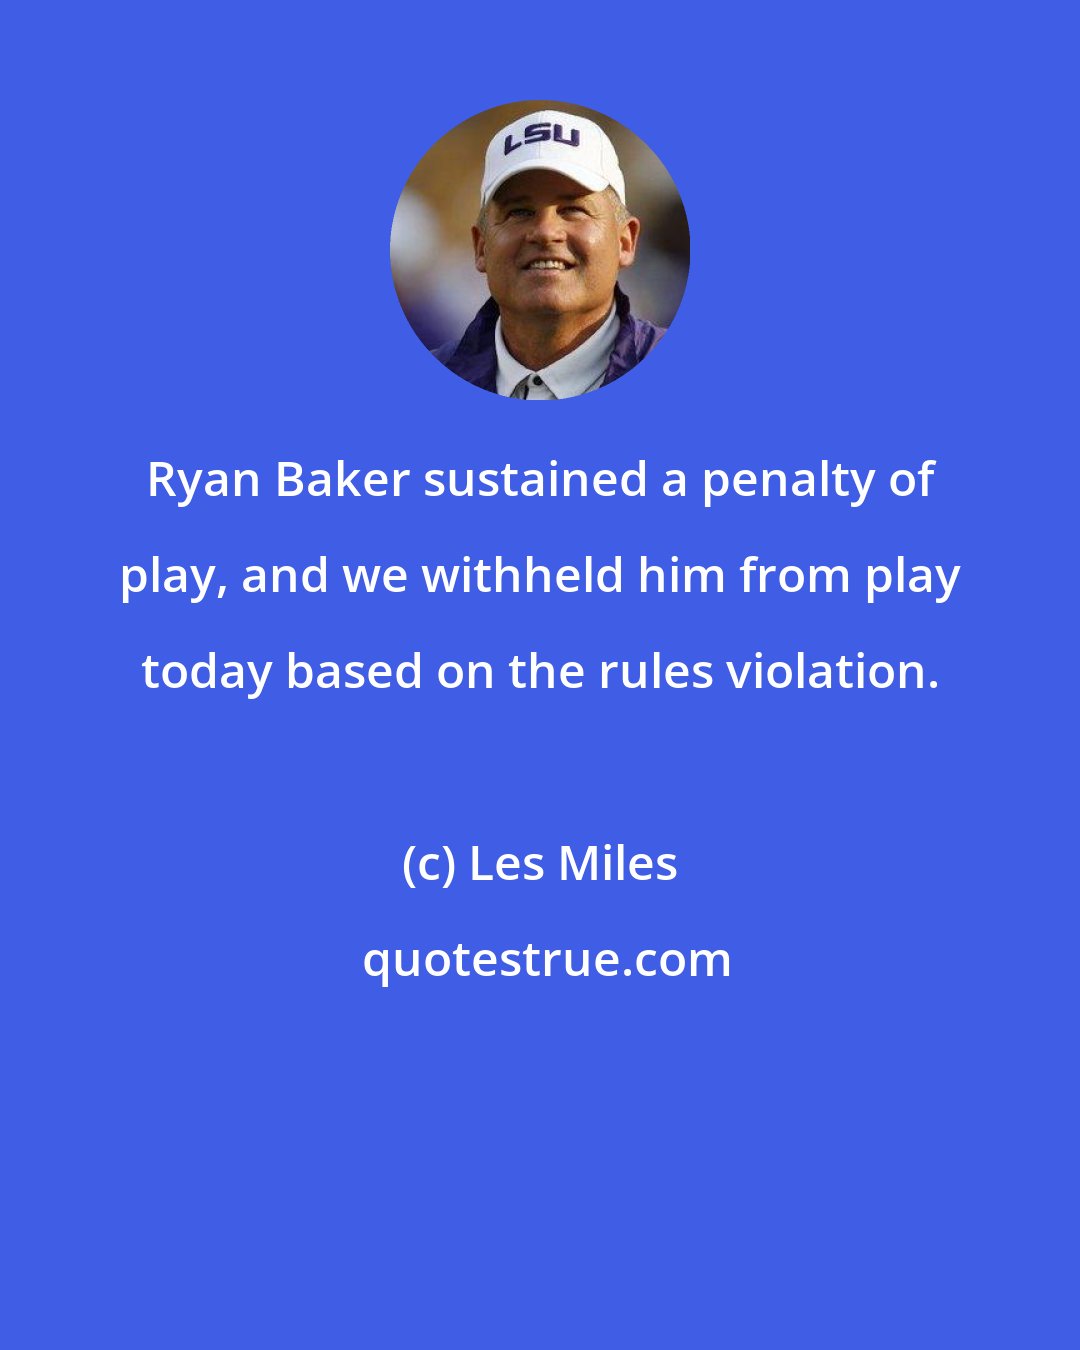 Les Miles: Ryan Baker sustained a penalty of play, and we withheld him from play today based on the rules violation.